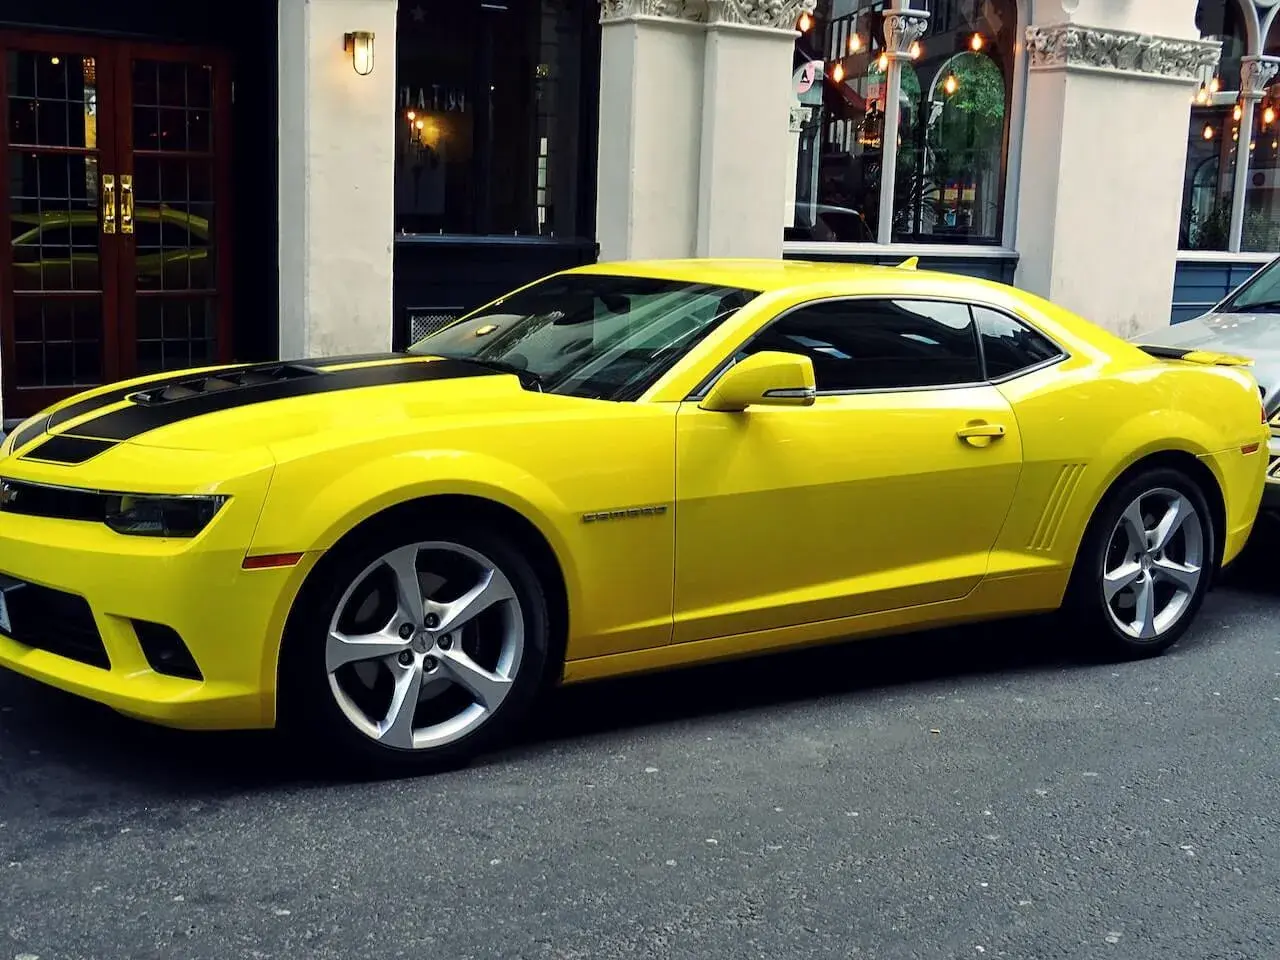 Yellow Chevrolet Camaro parked on the street